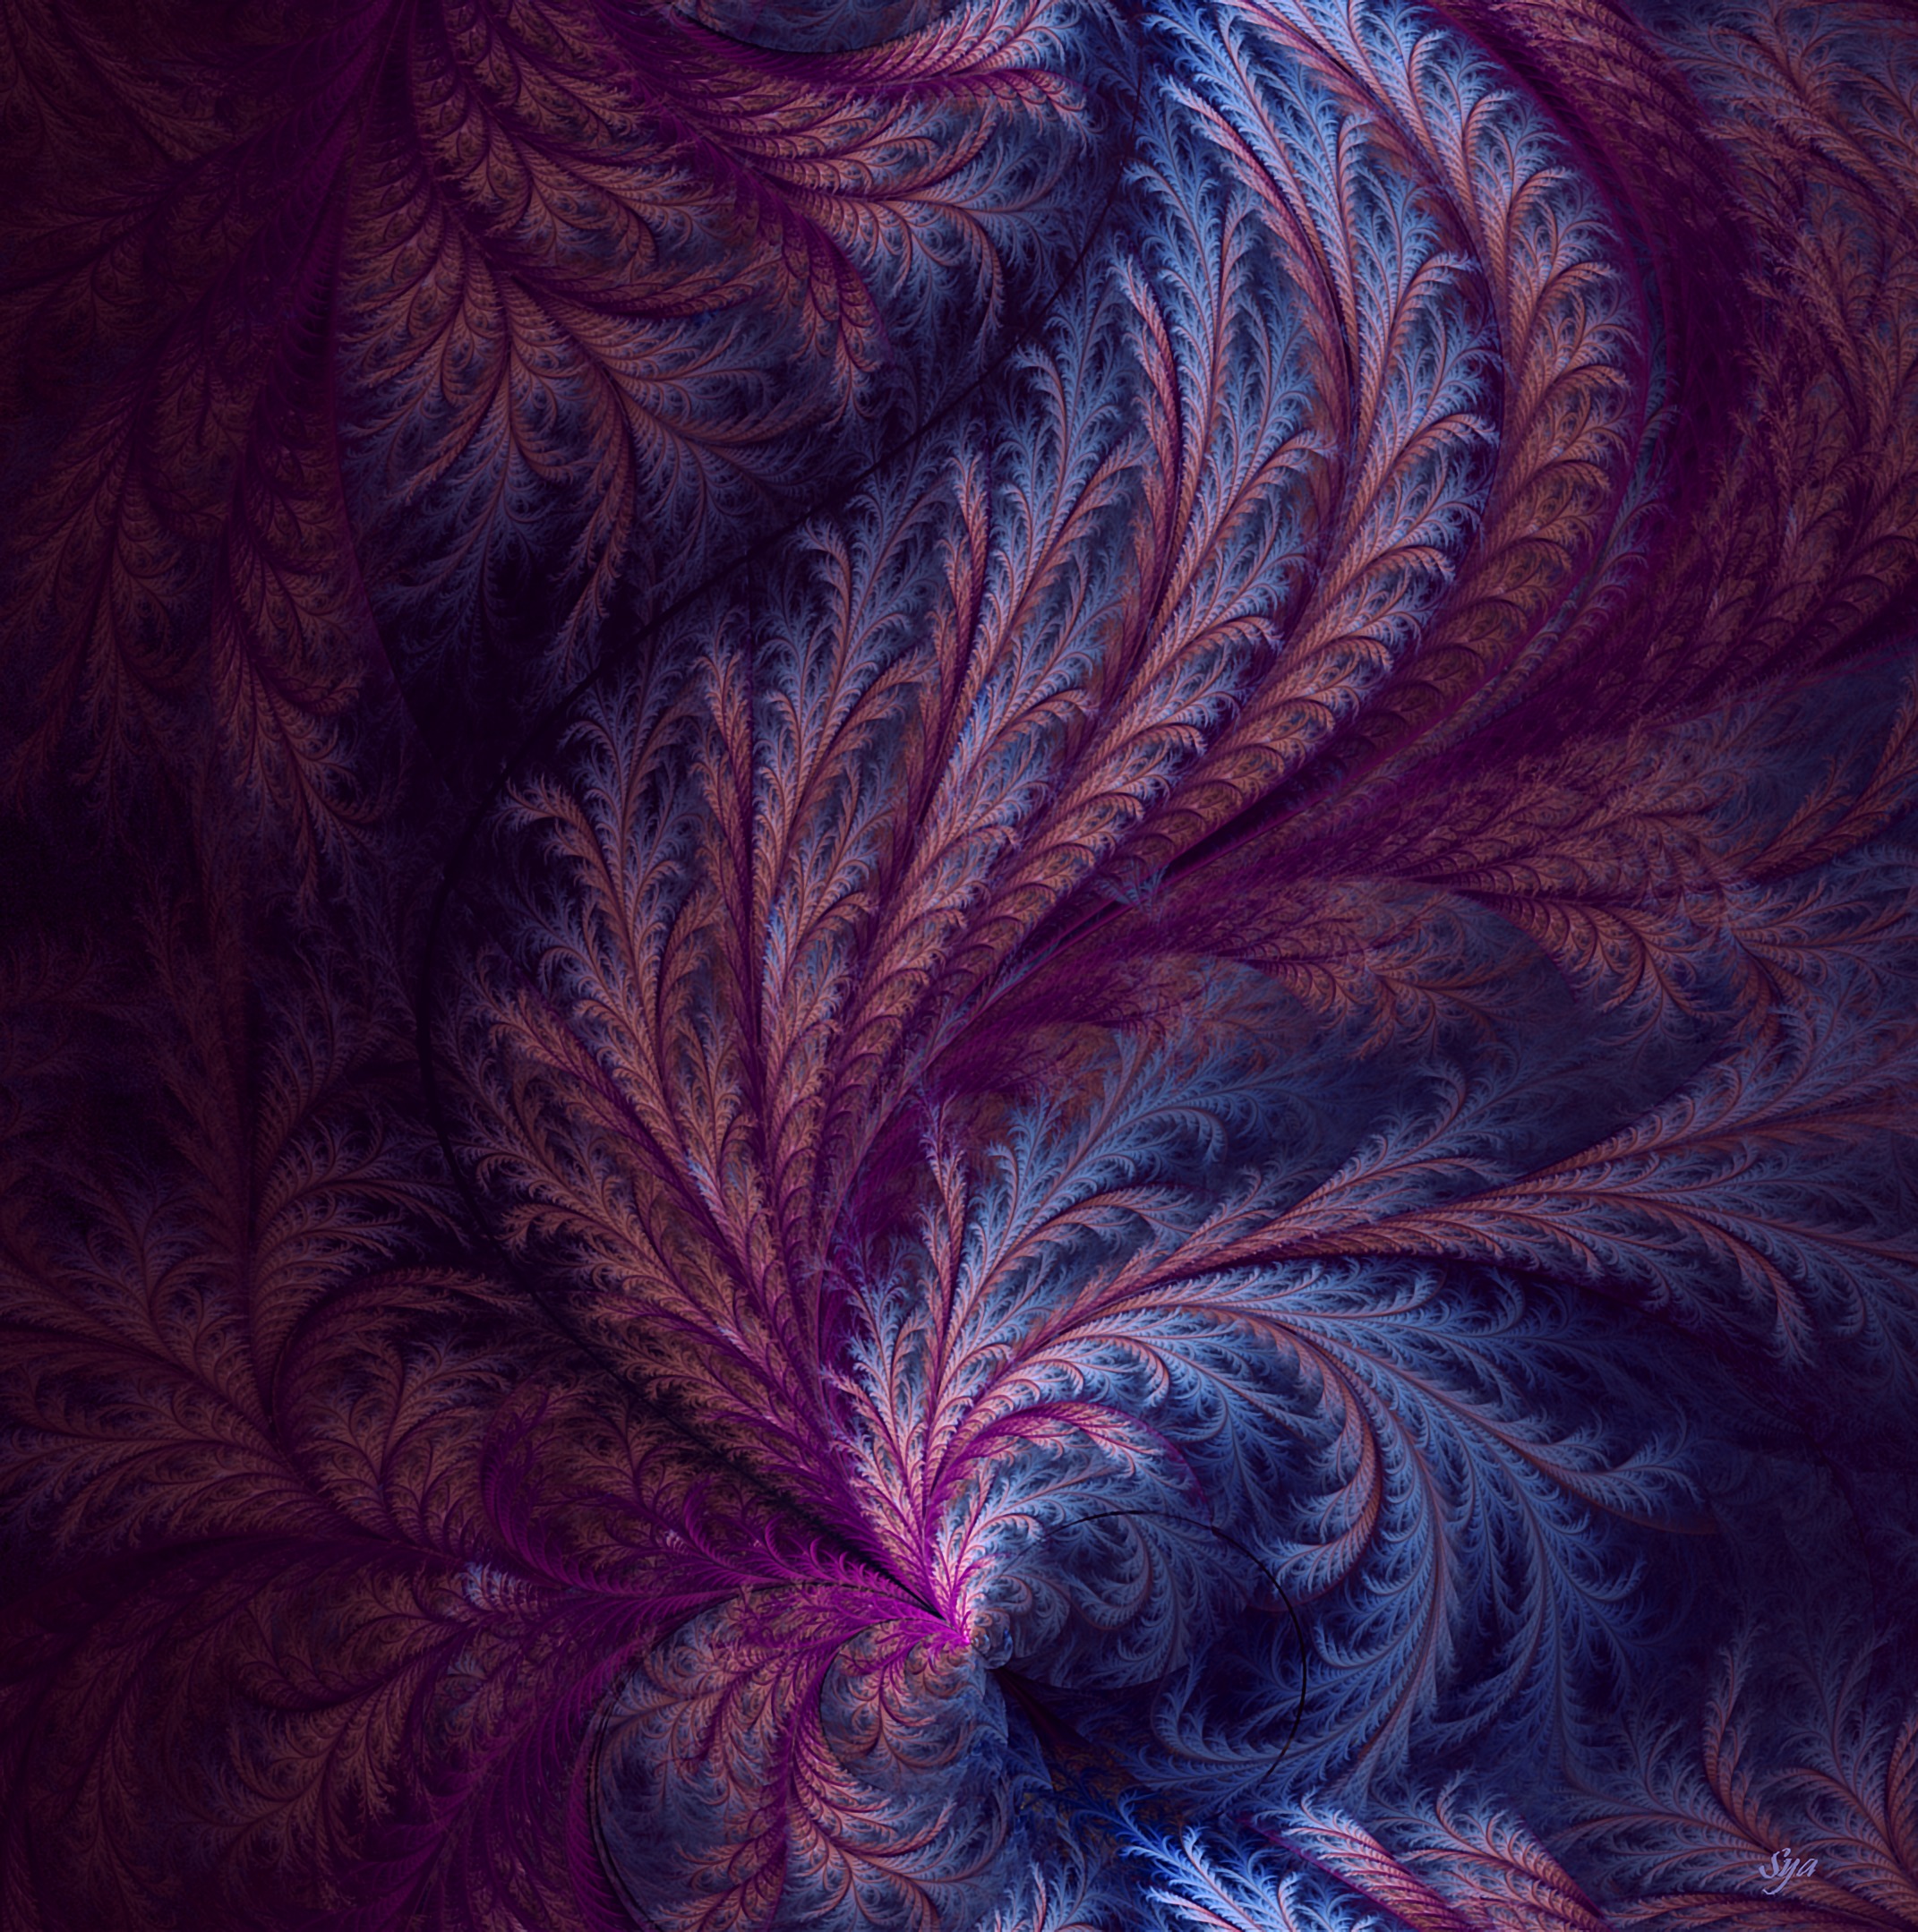 fractal, pattern, intricate, confused, branchy, abstract, branched iphone wallpaper